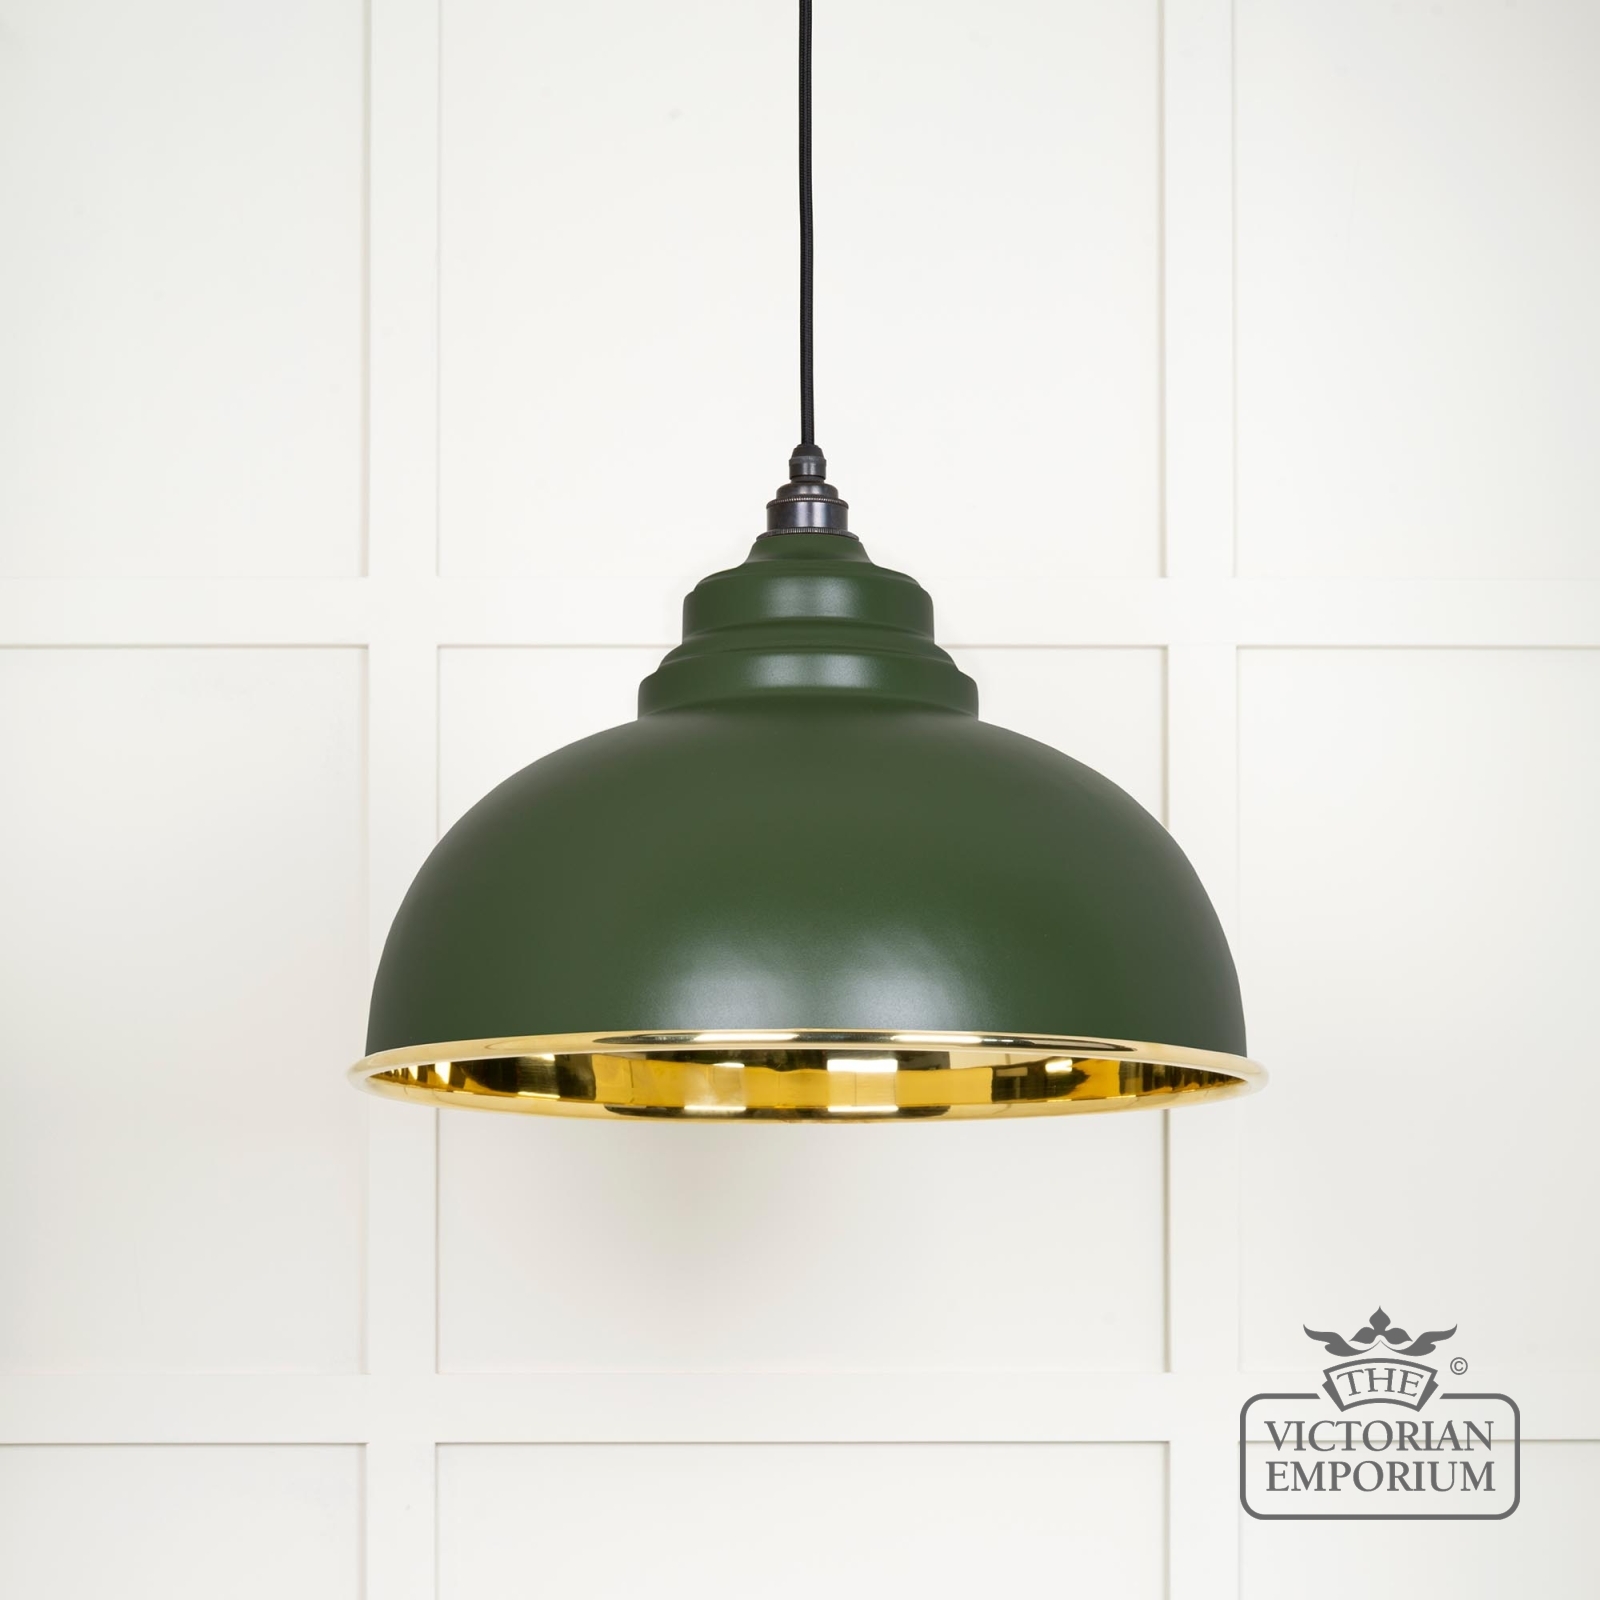 Harlow pendant light in smooth brass with painted Heath exterior